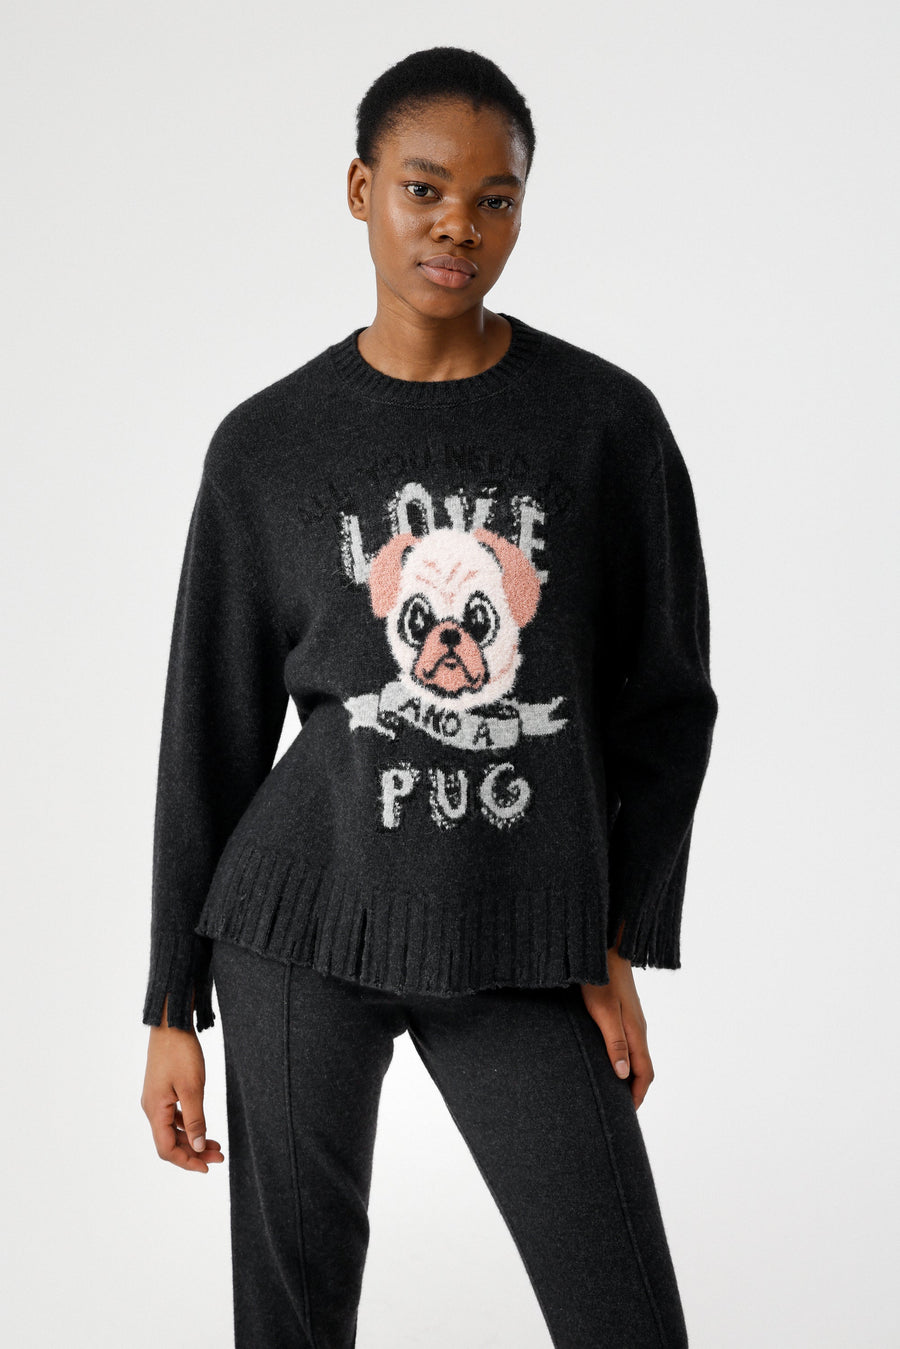 Pug Lover's Sweater